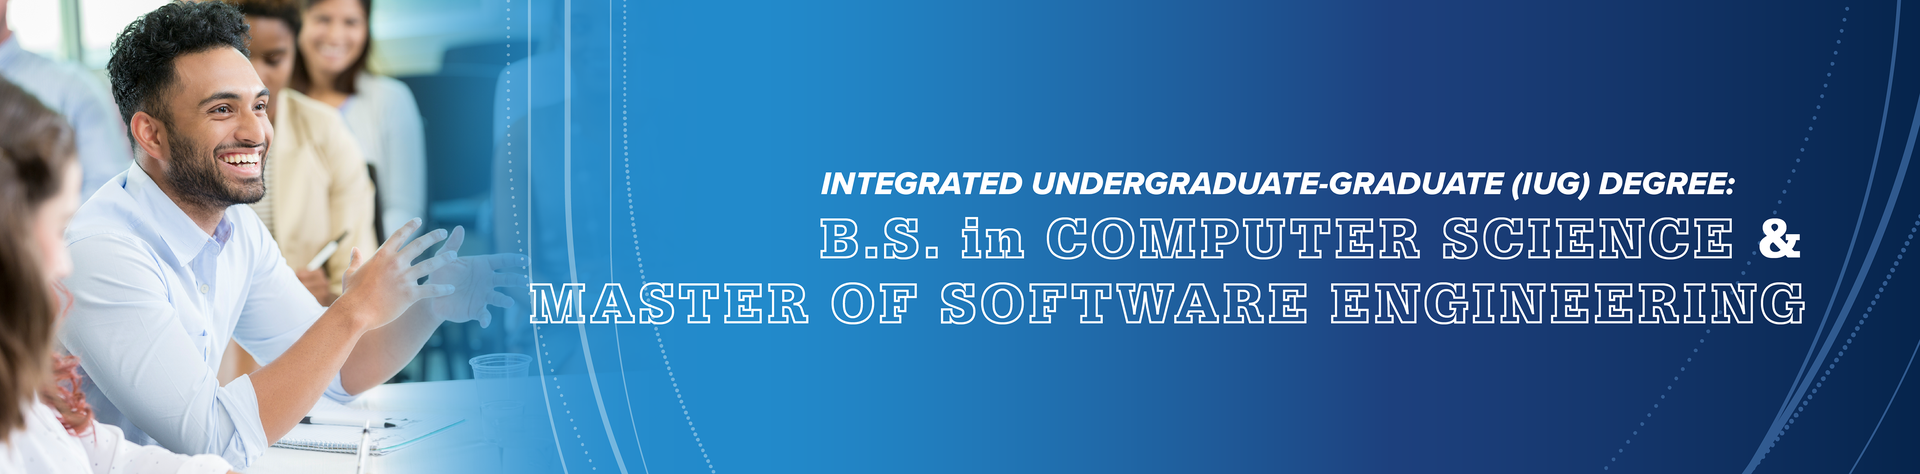 Banner image with a student and the words "integrated undergraduate-graduate (IUG) degree: B.S. in computer science & master of software engineering"